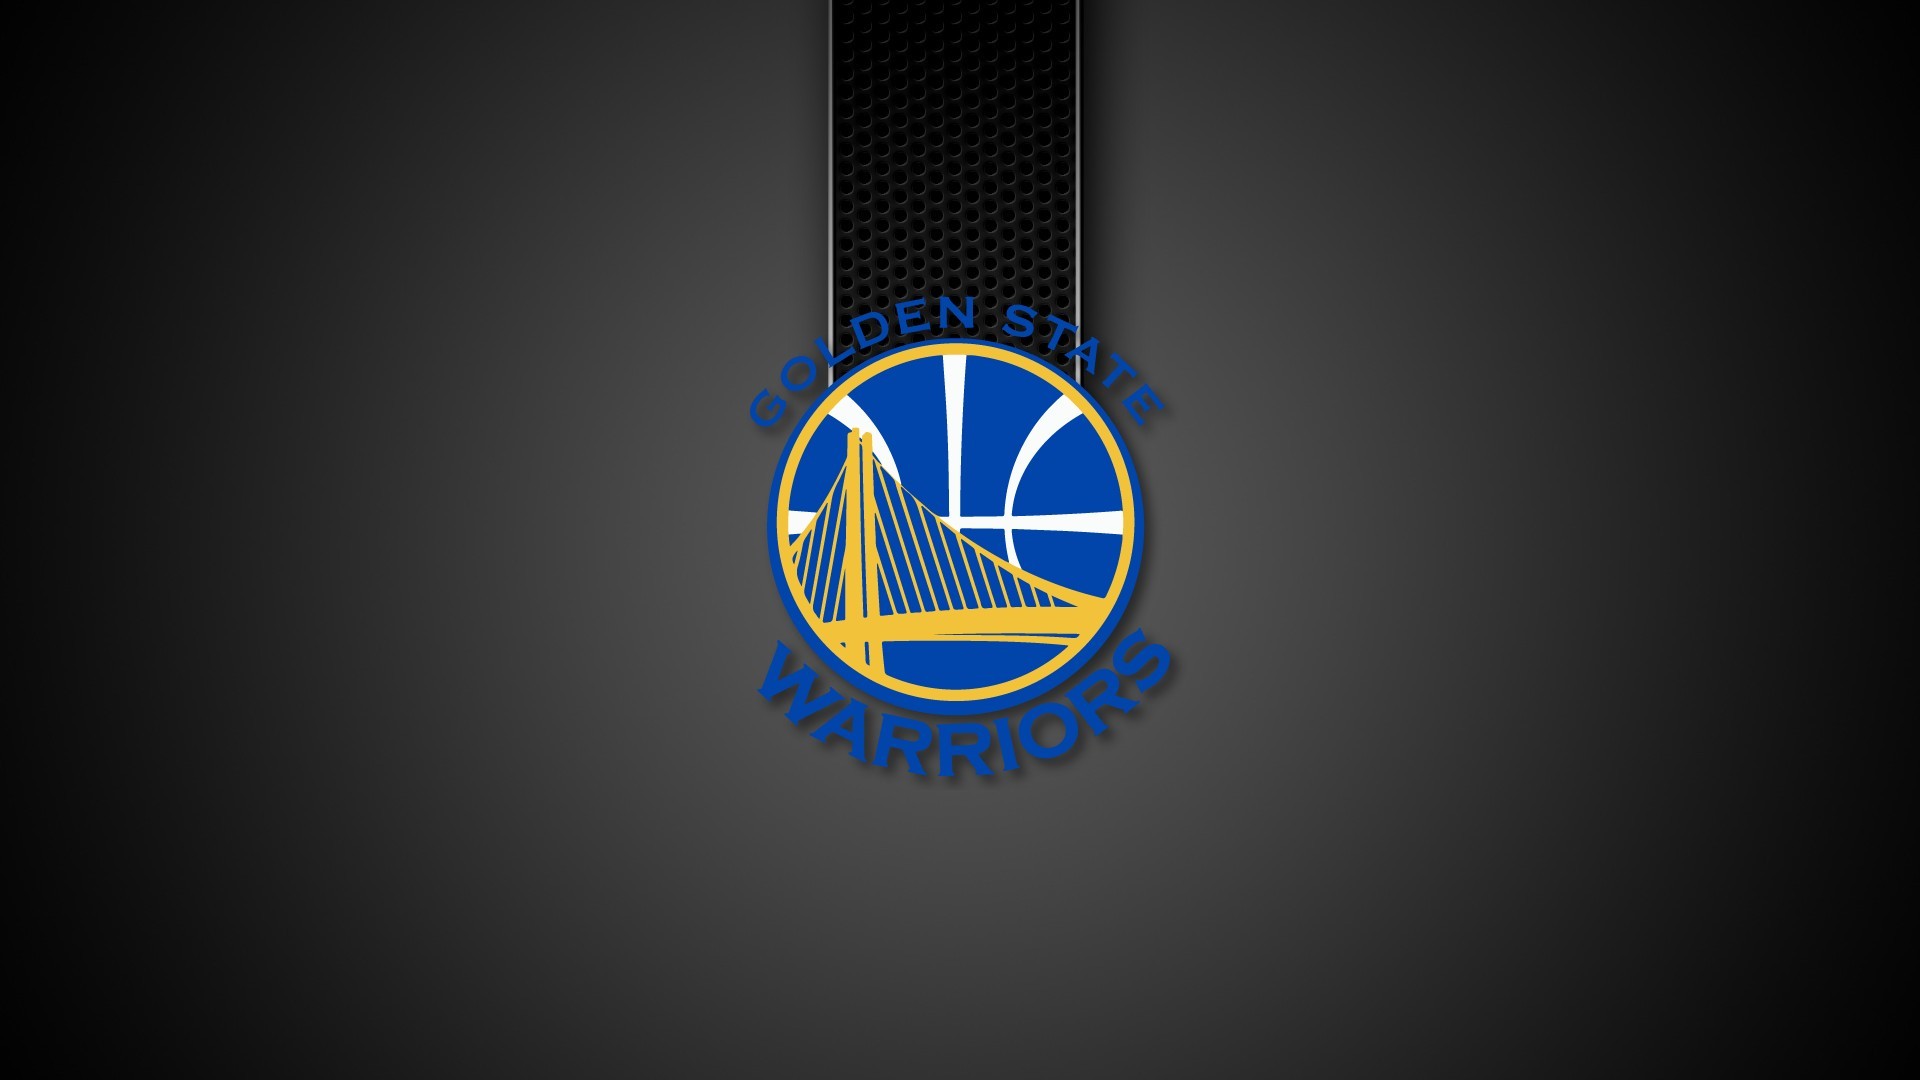 1920x1080 Wallpapers HD Golden State Warriors NBA with image dimensions   pixel. You can make this